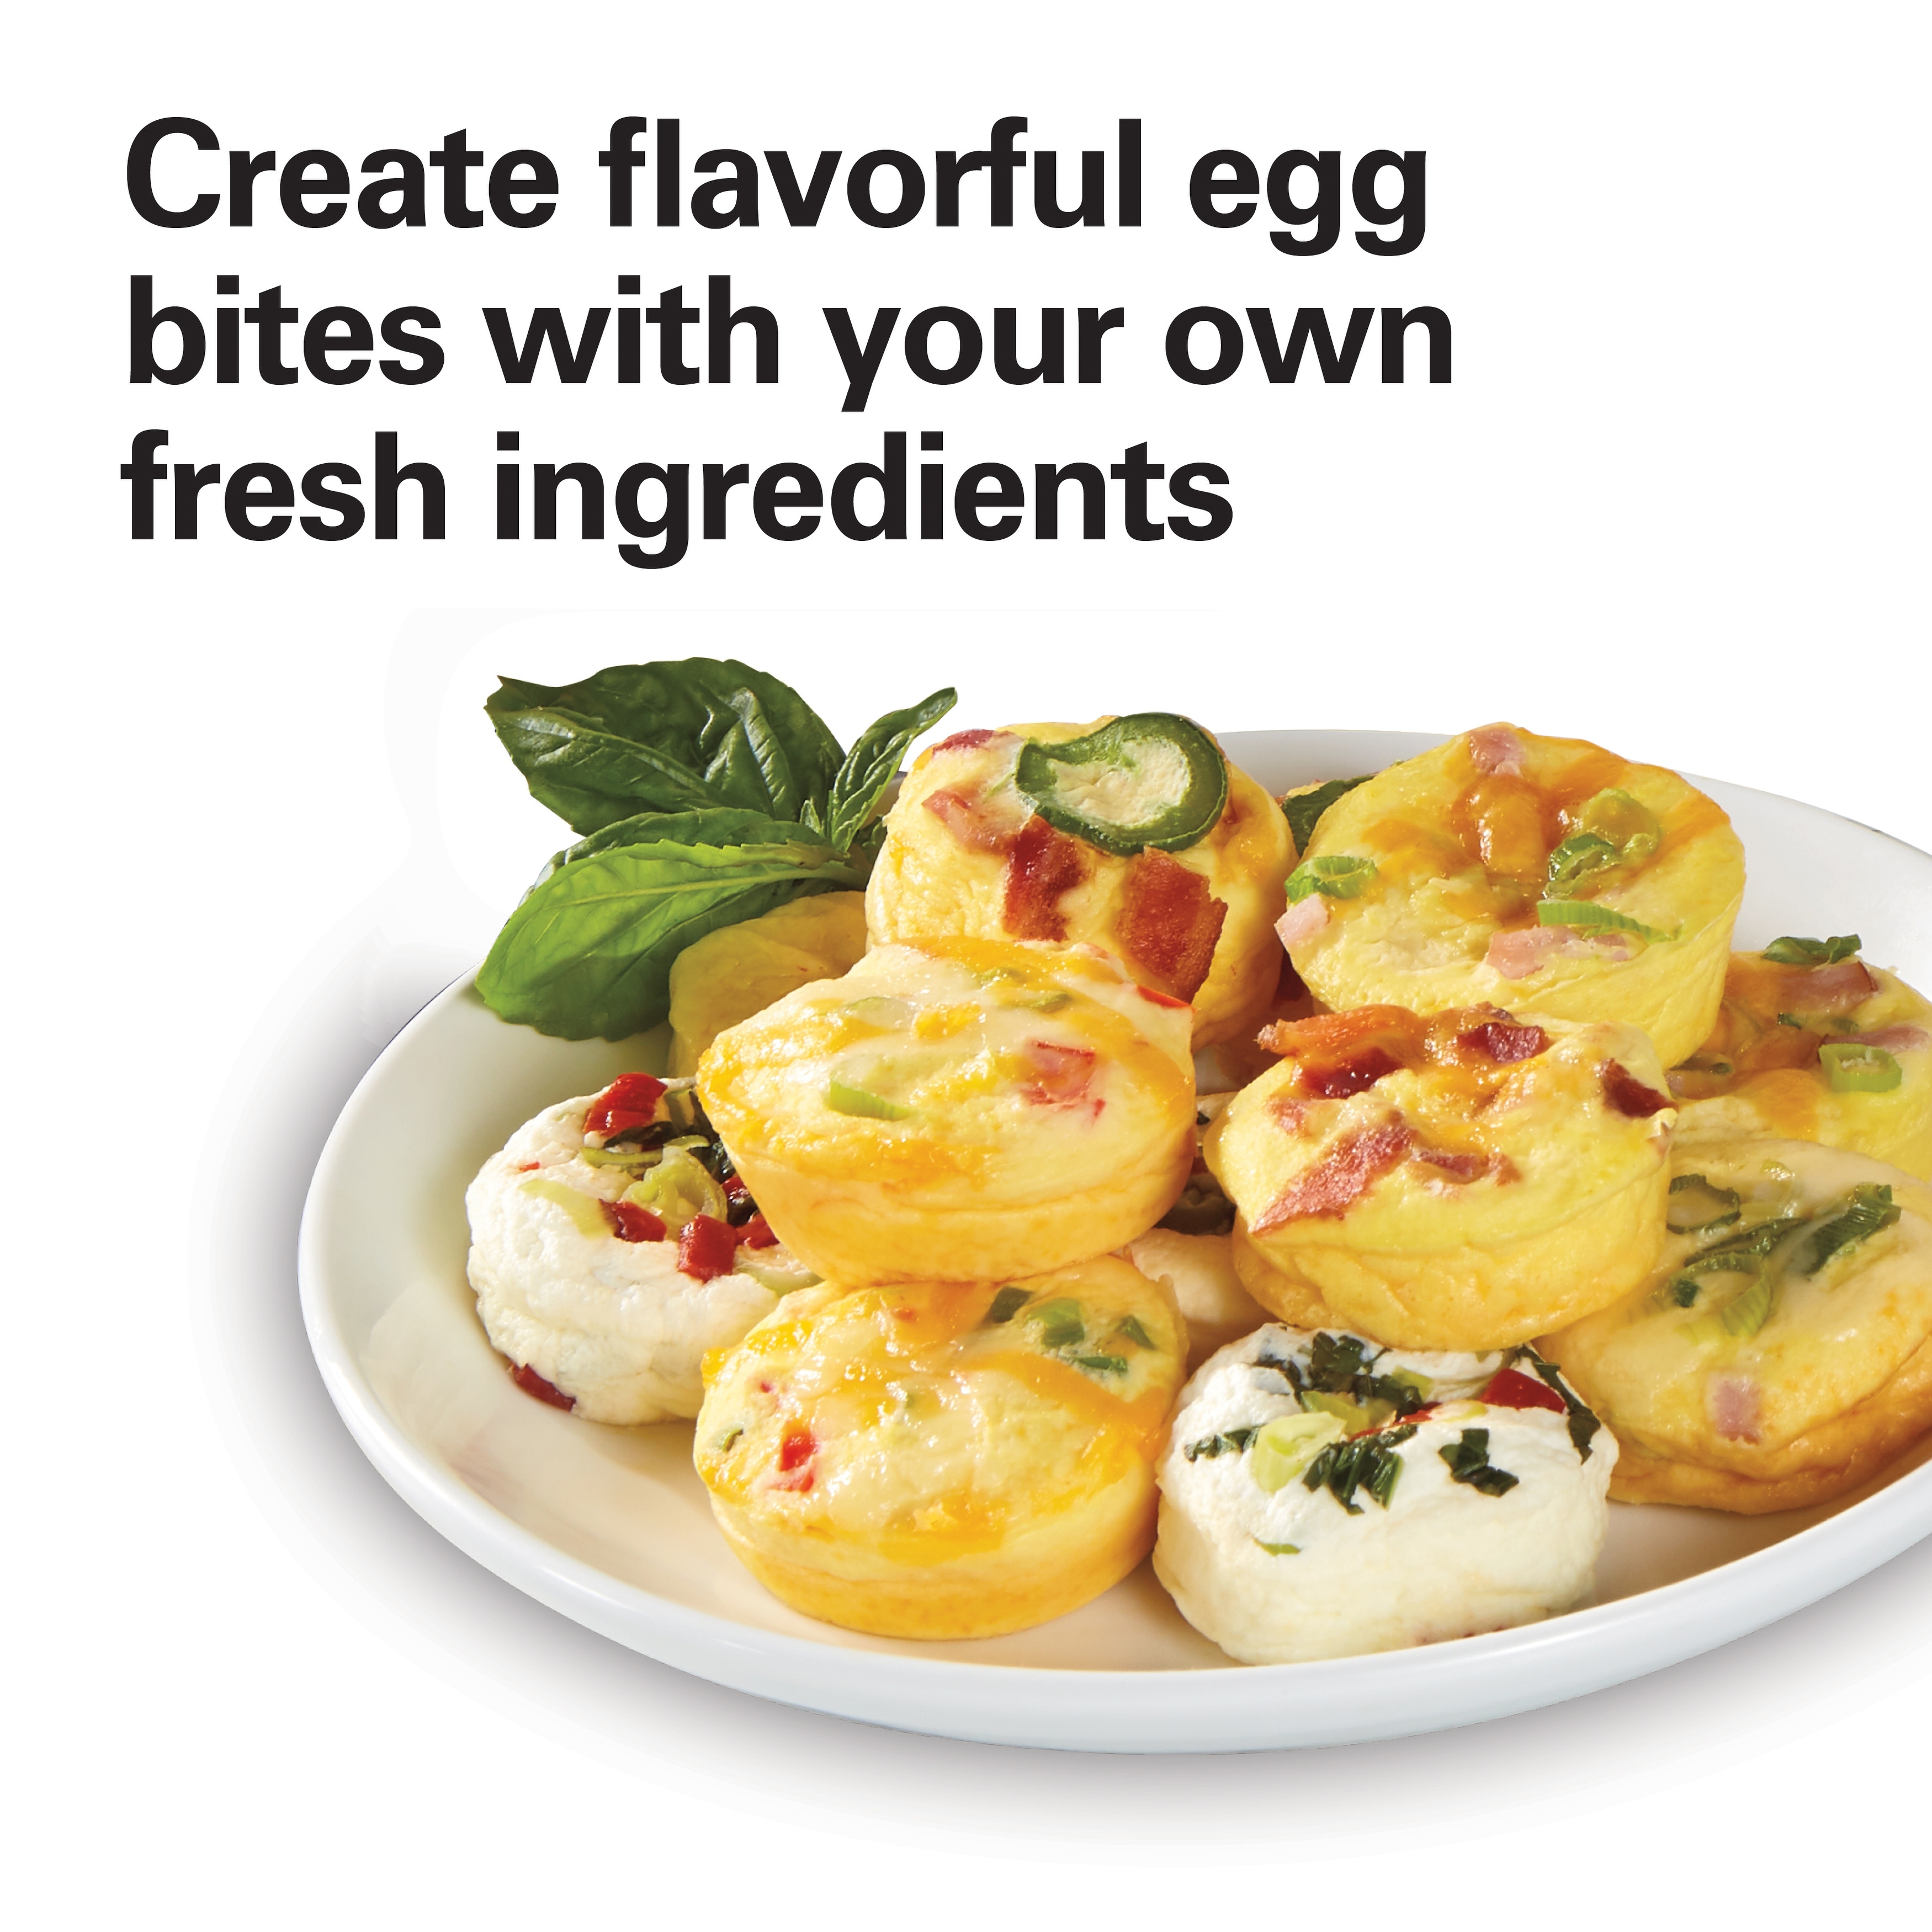 https://ak1.ostkcdn.com/images/products/is/images/direct/ae531dfc3a3a54ebd4028addfb7811a7da889417/Hamilton-Beach-Egg-Bites-Maker-with-Hard-Boiled-Eggs-Insert.jpg